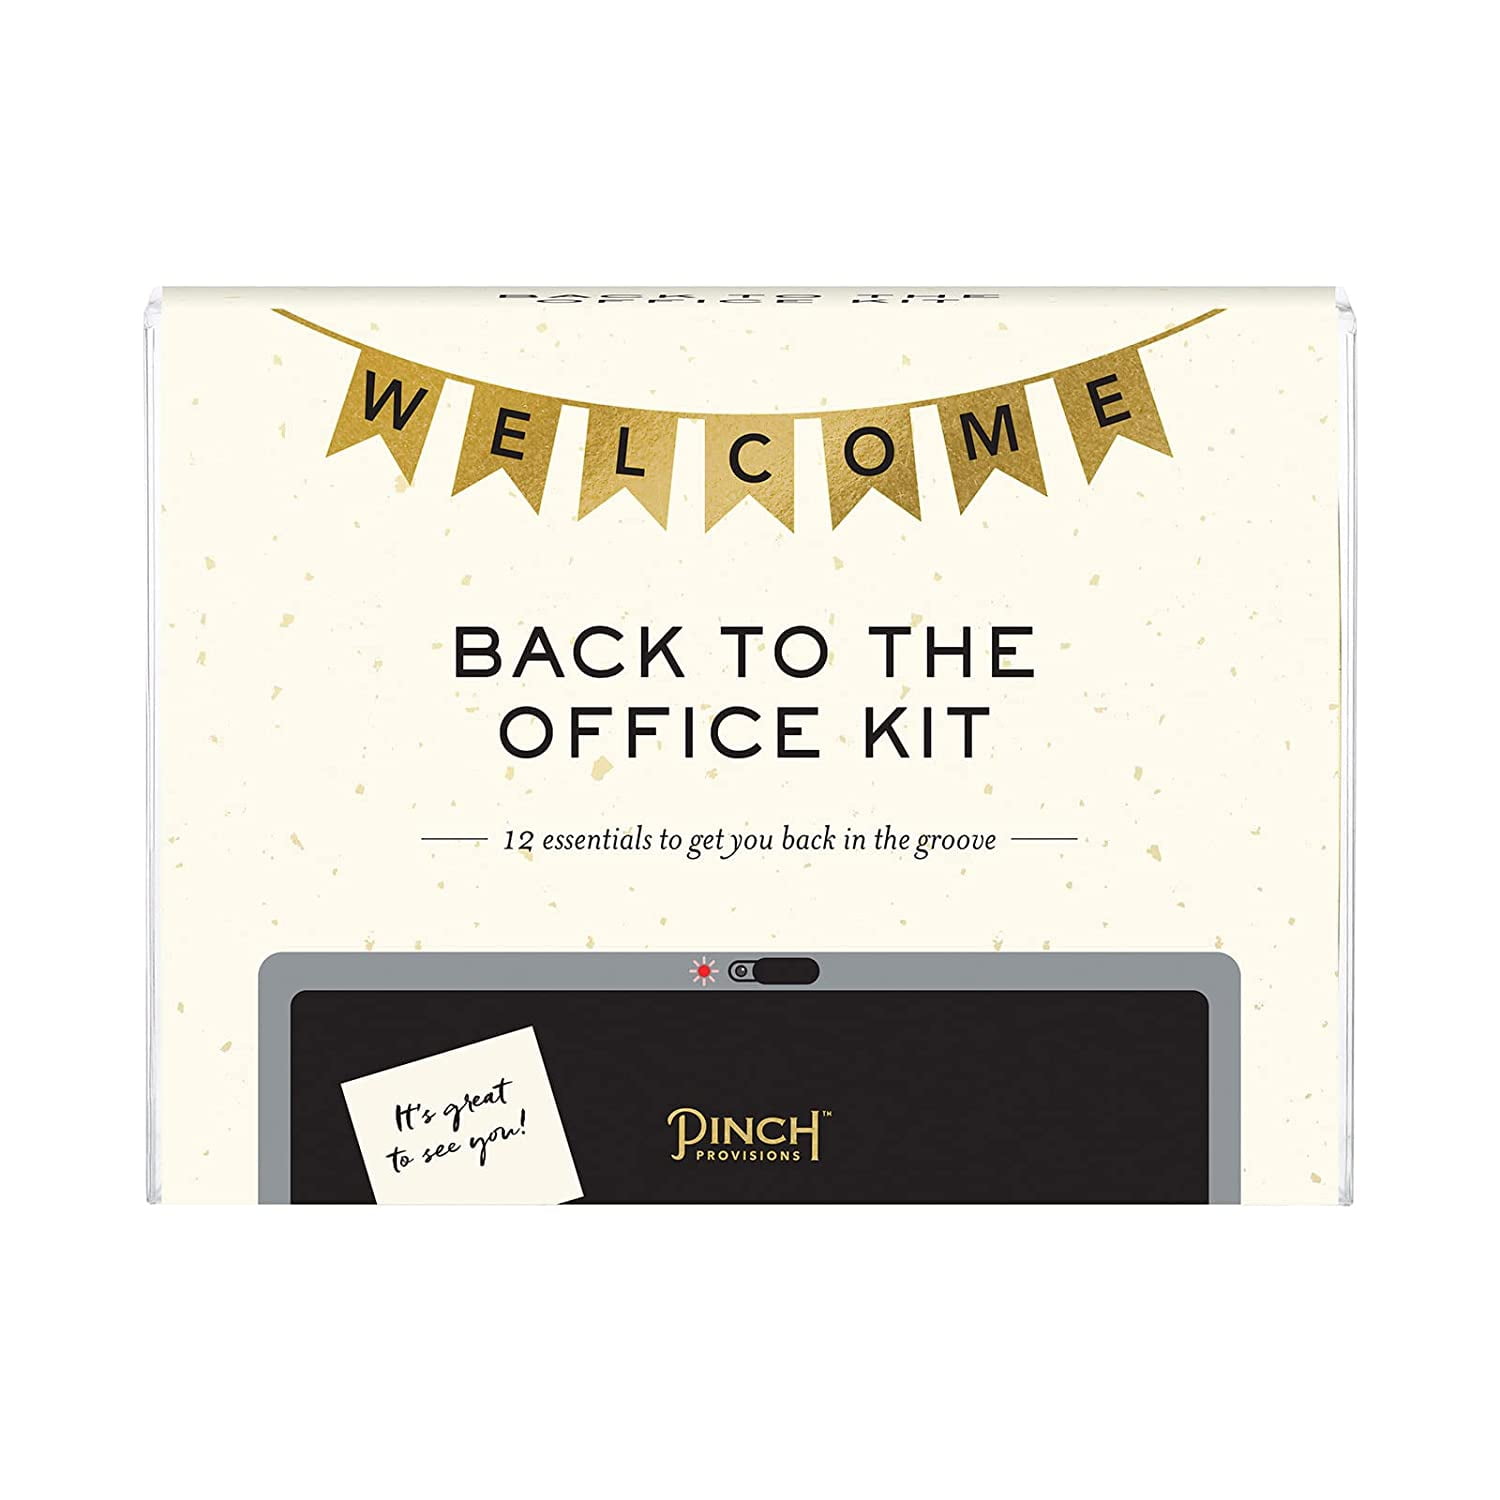 Pinch Provisions Back to The Office Kit for Boss, Employee